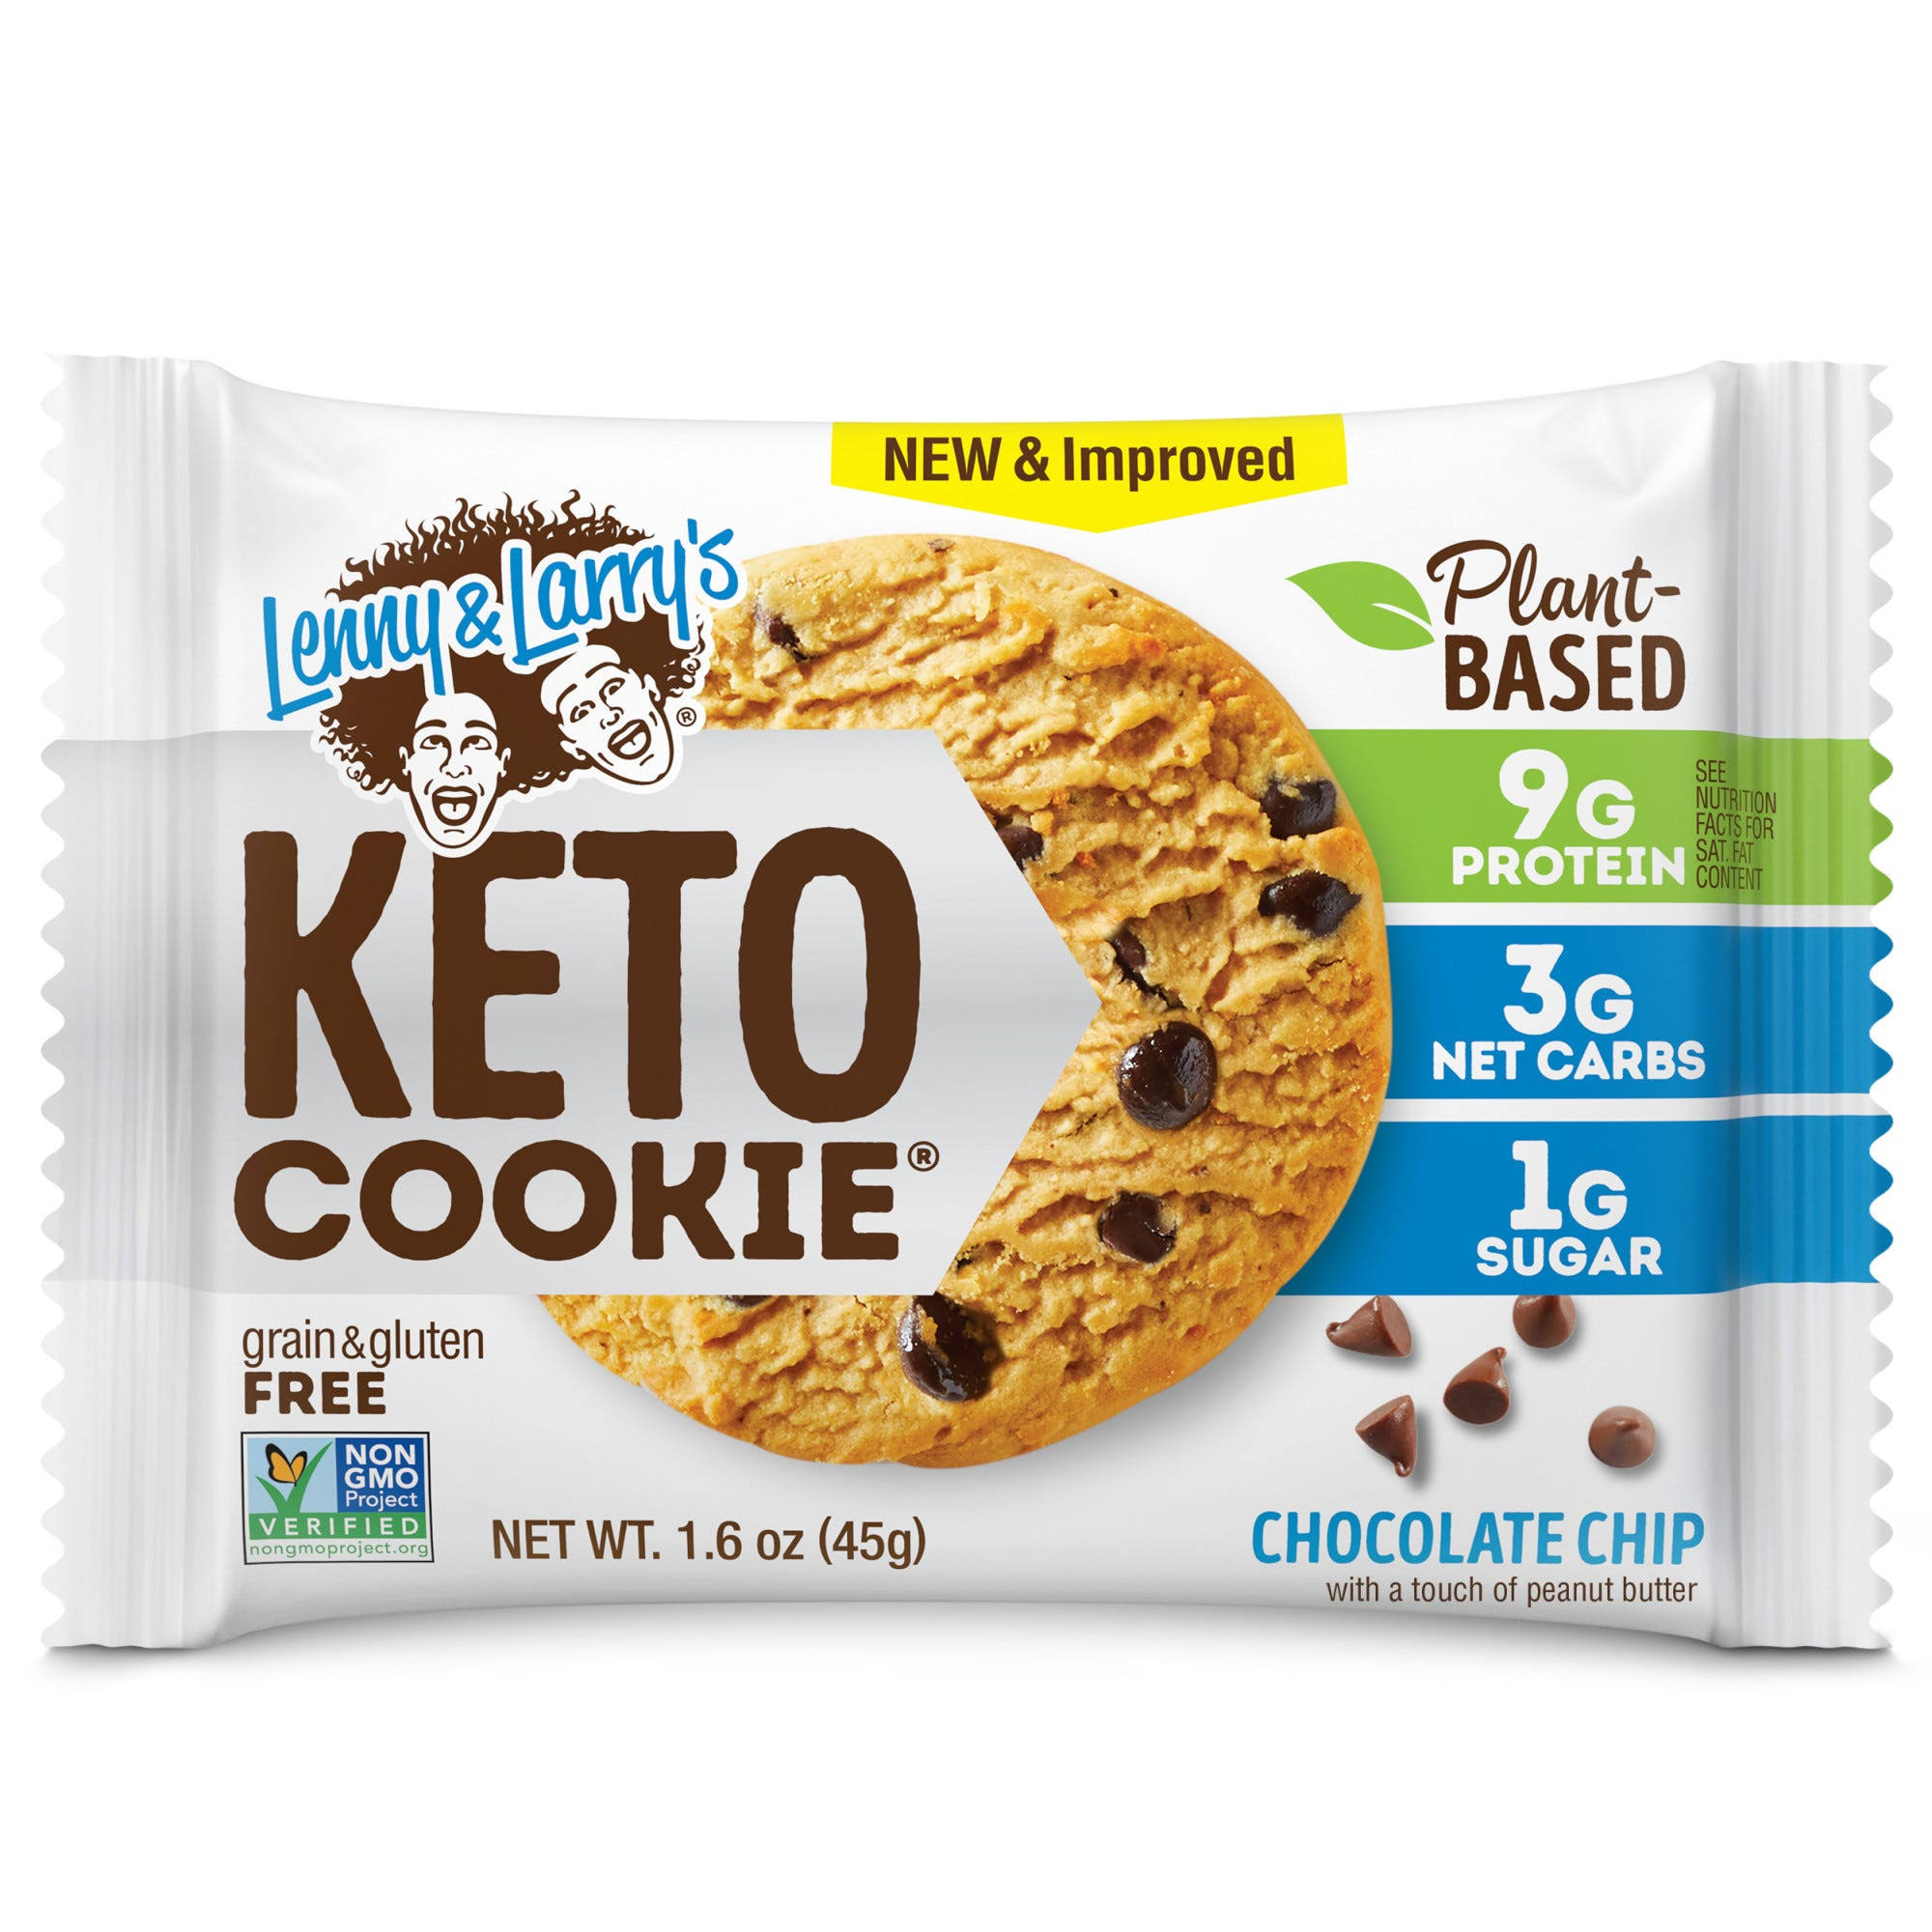 Lenny & Larry's Keto Cookie, Chocolate Chip - 1.6 oz